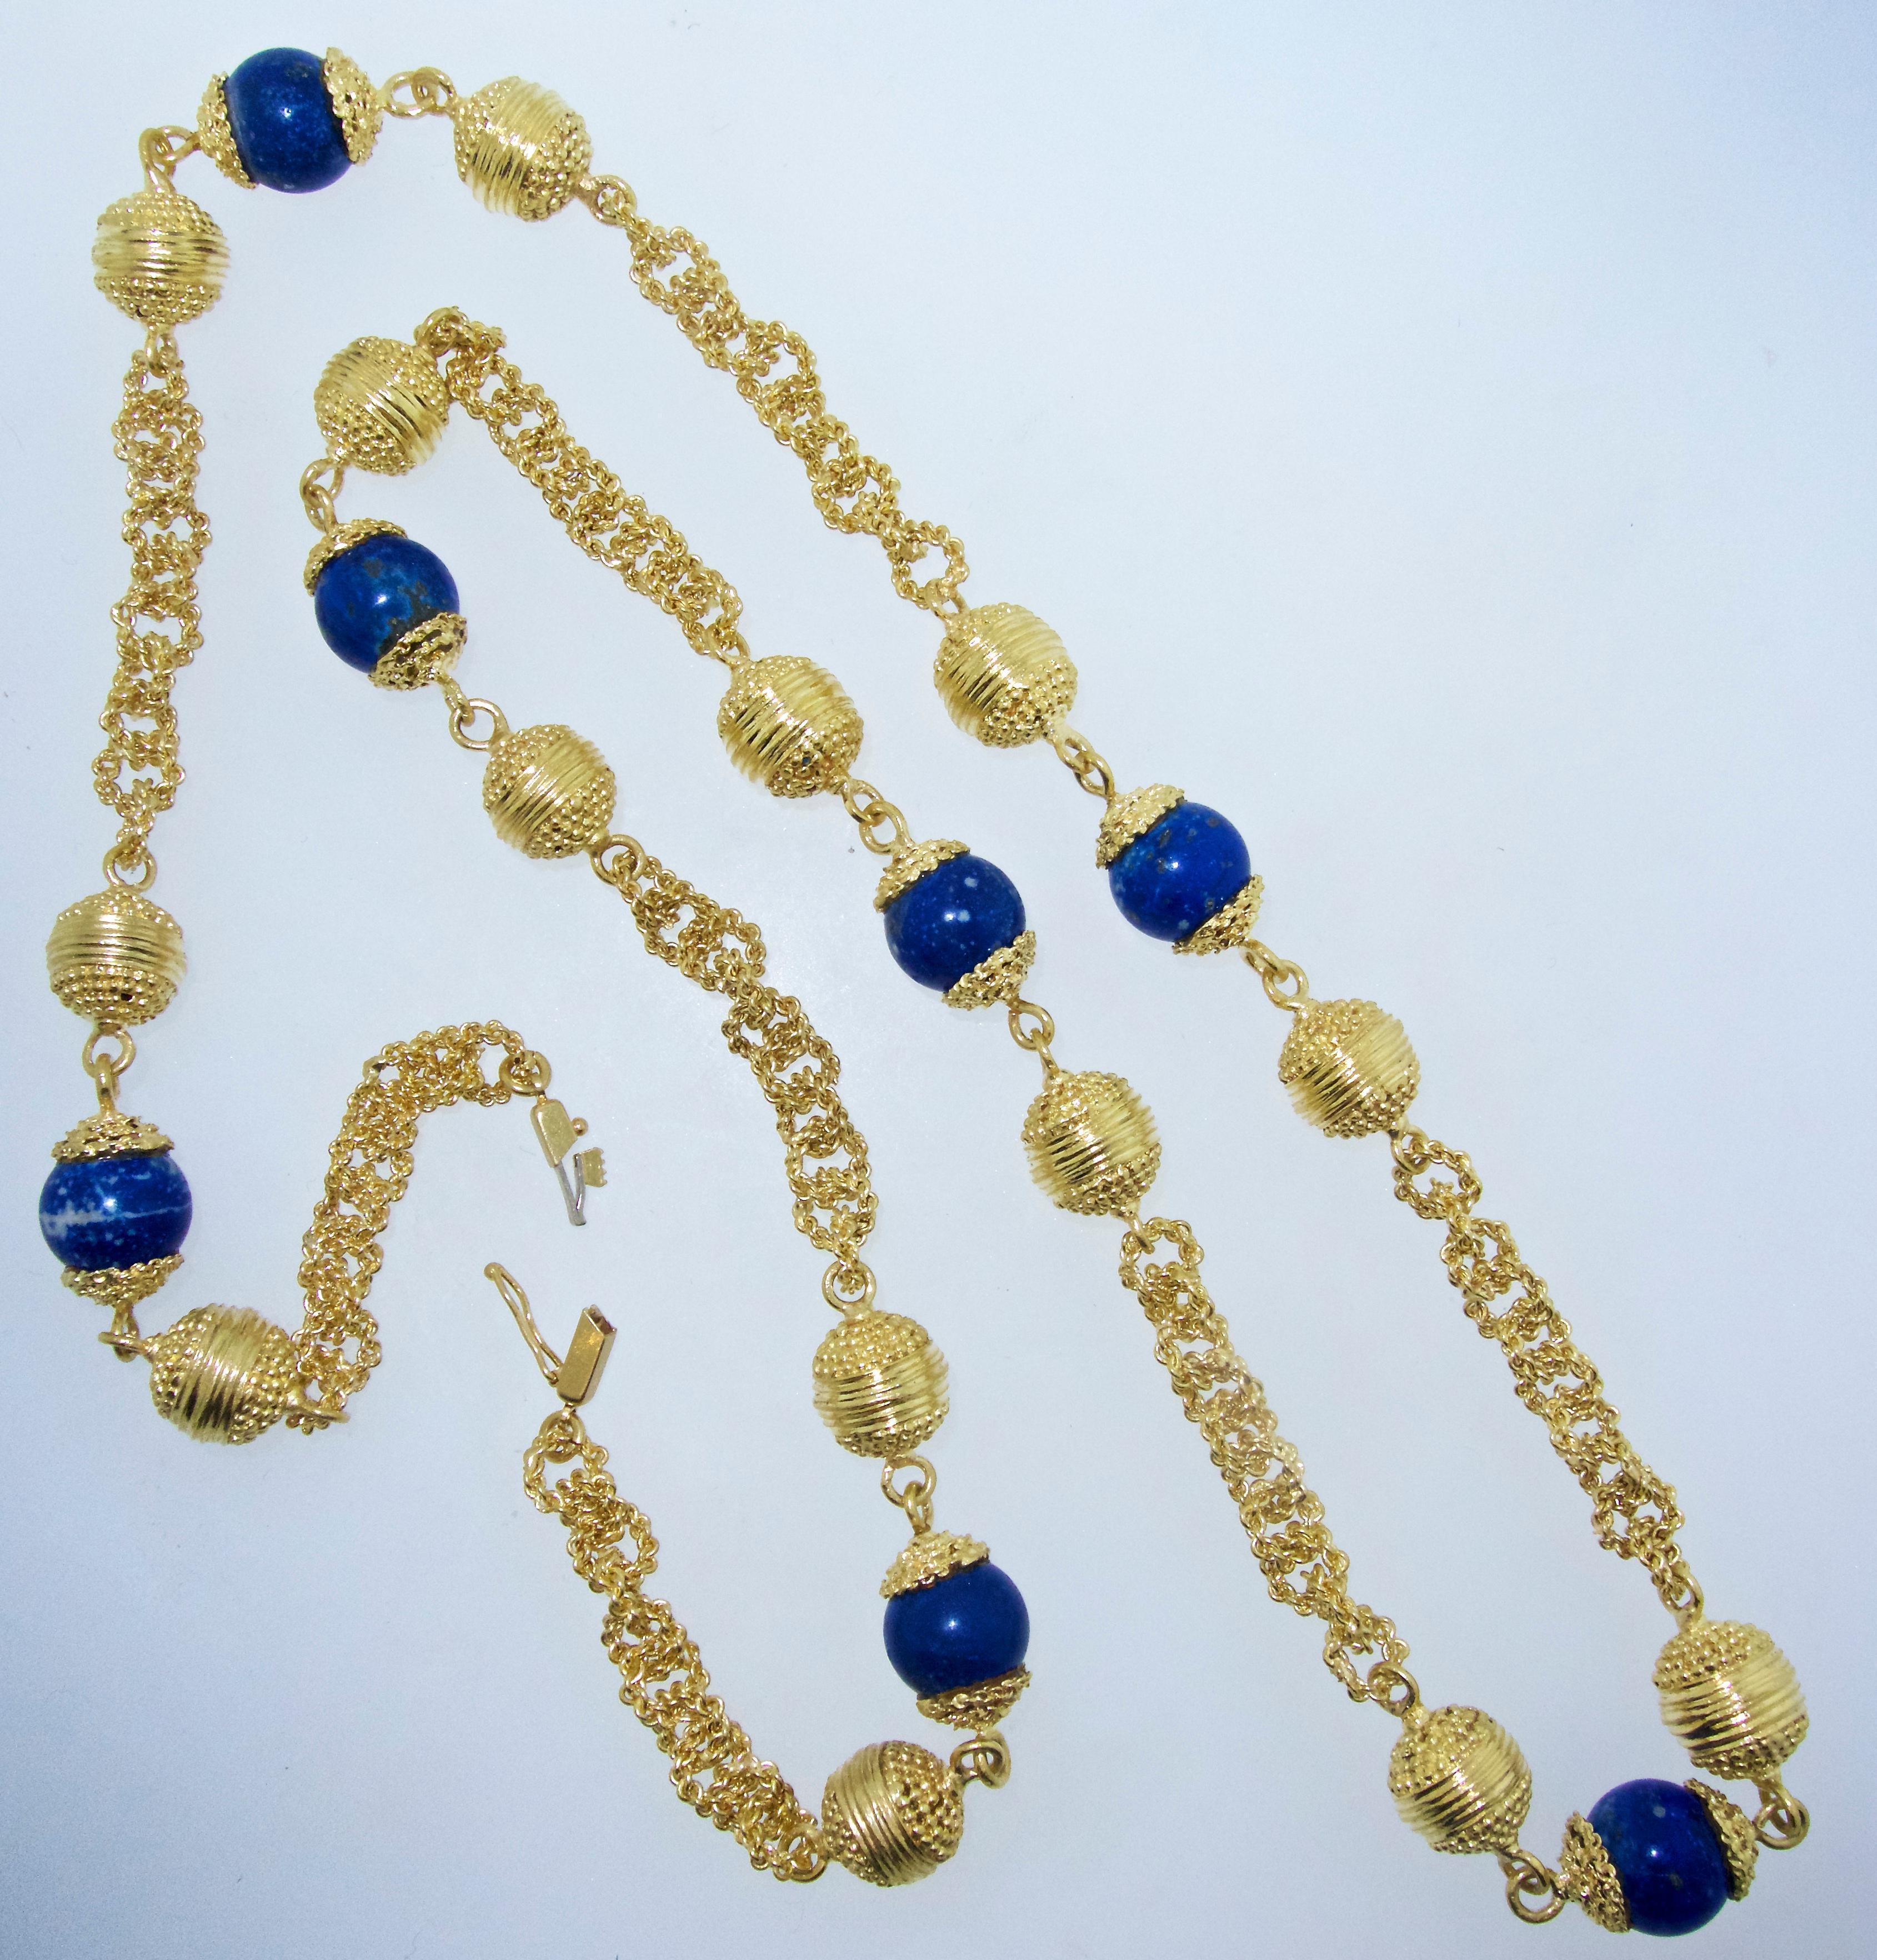 Long necklace of 18K yellow gold and 7 fine natural lapis lazuli beads - all a vibrant blue and well matched and 11 mm in diameter.  This necklace chain is 32 inches long and weighs 147 grams.    The handmade links are very ornate and unusual.  This